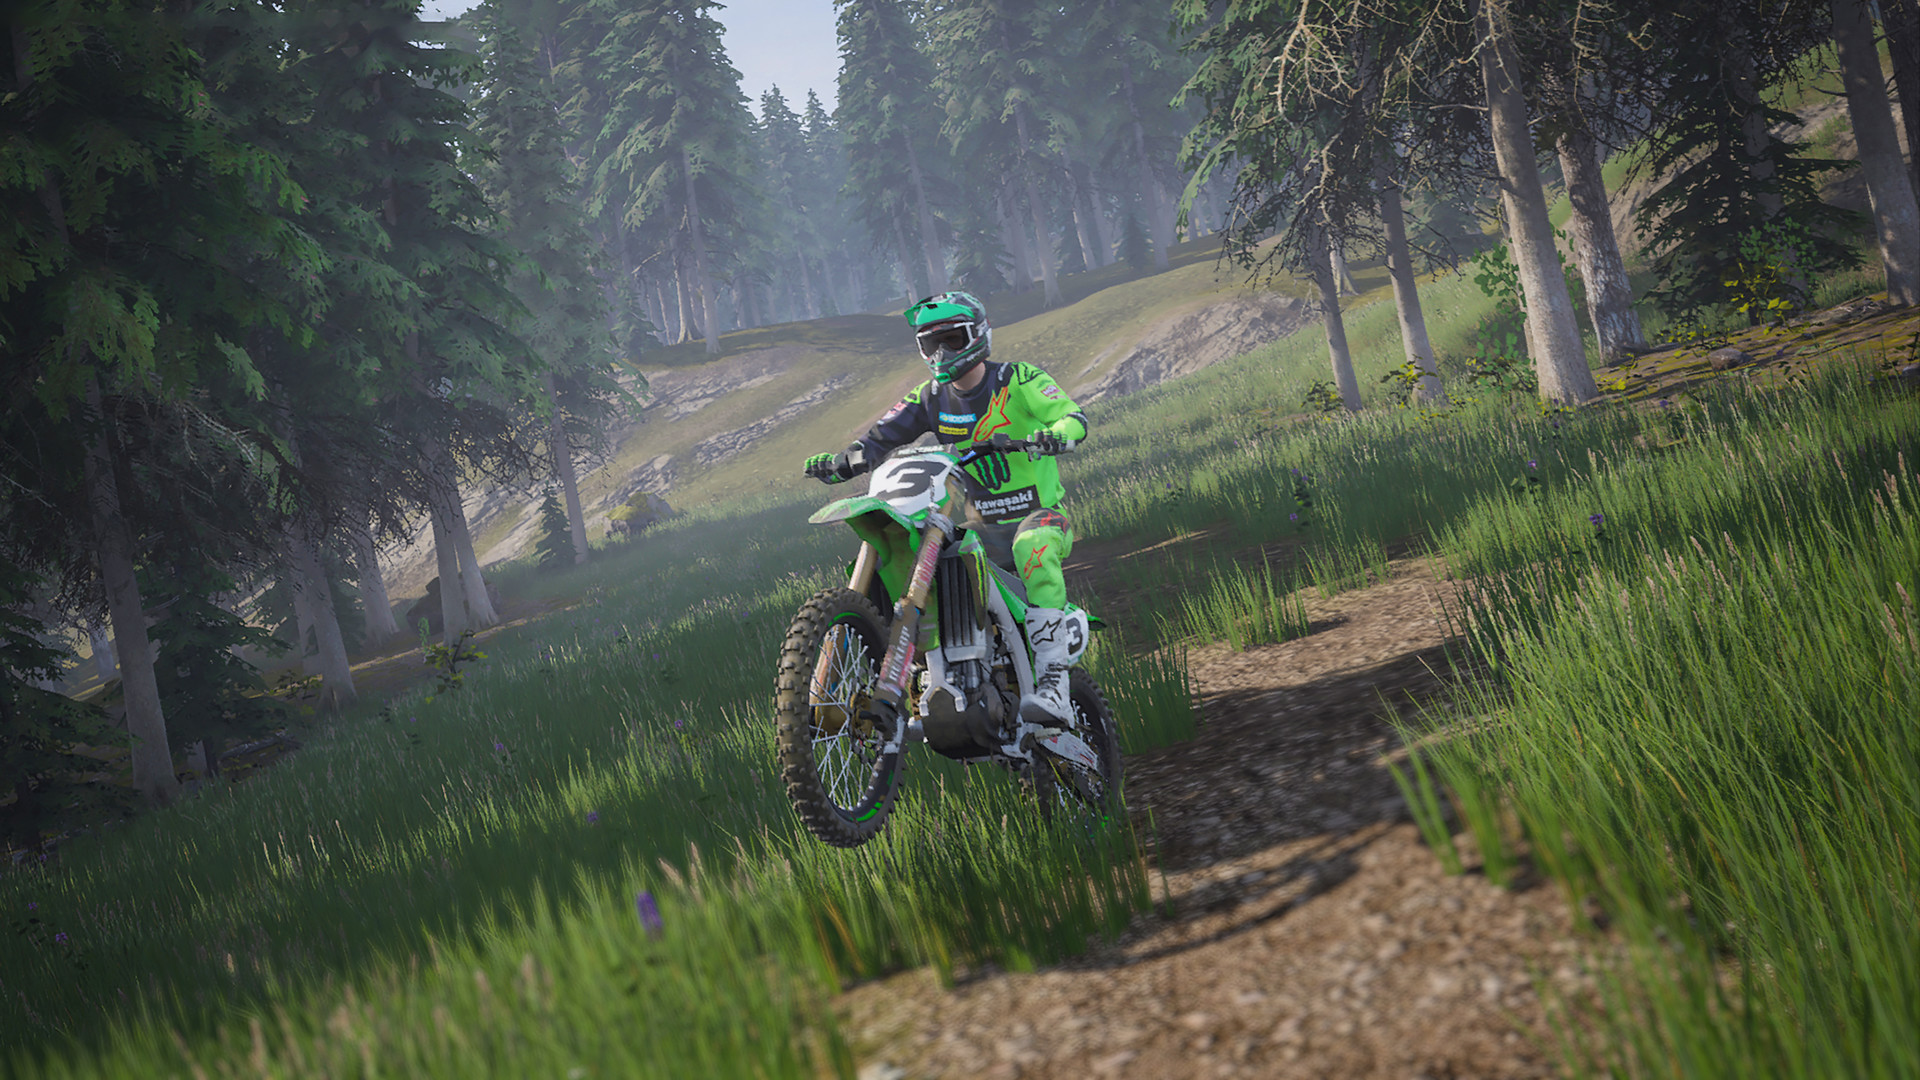 Find the best laptops for MXGP 2020 - The Official Motocross Videogame